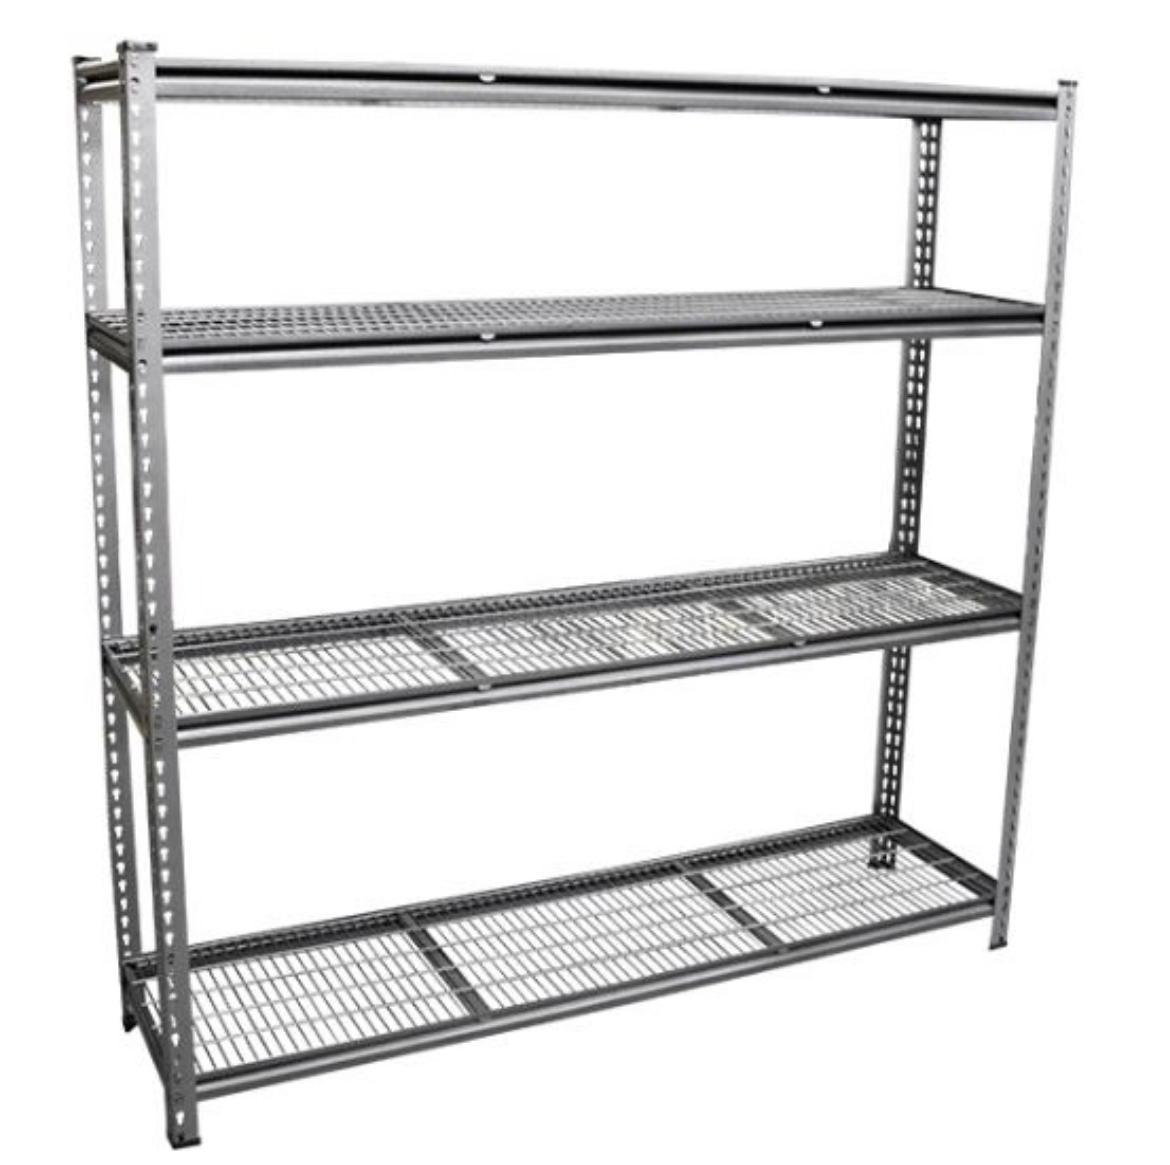 Picture of 1500kg Steel Mesh Shelving Unit - 1830mm (H)  x 1820mm (W)  x 472mm (D) Load Capacity: 1500kg (375kg evenly distributed per shelf)